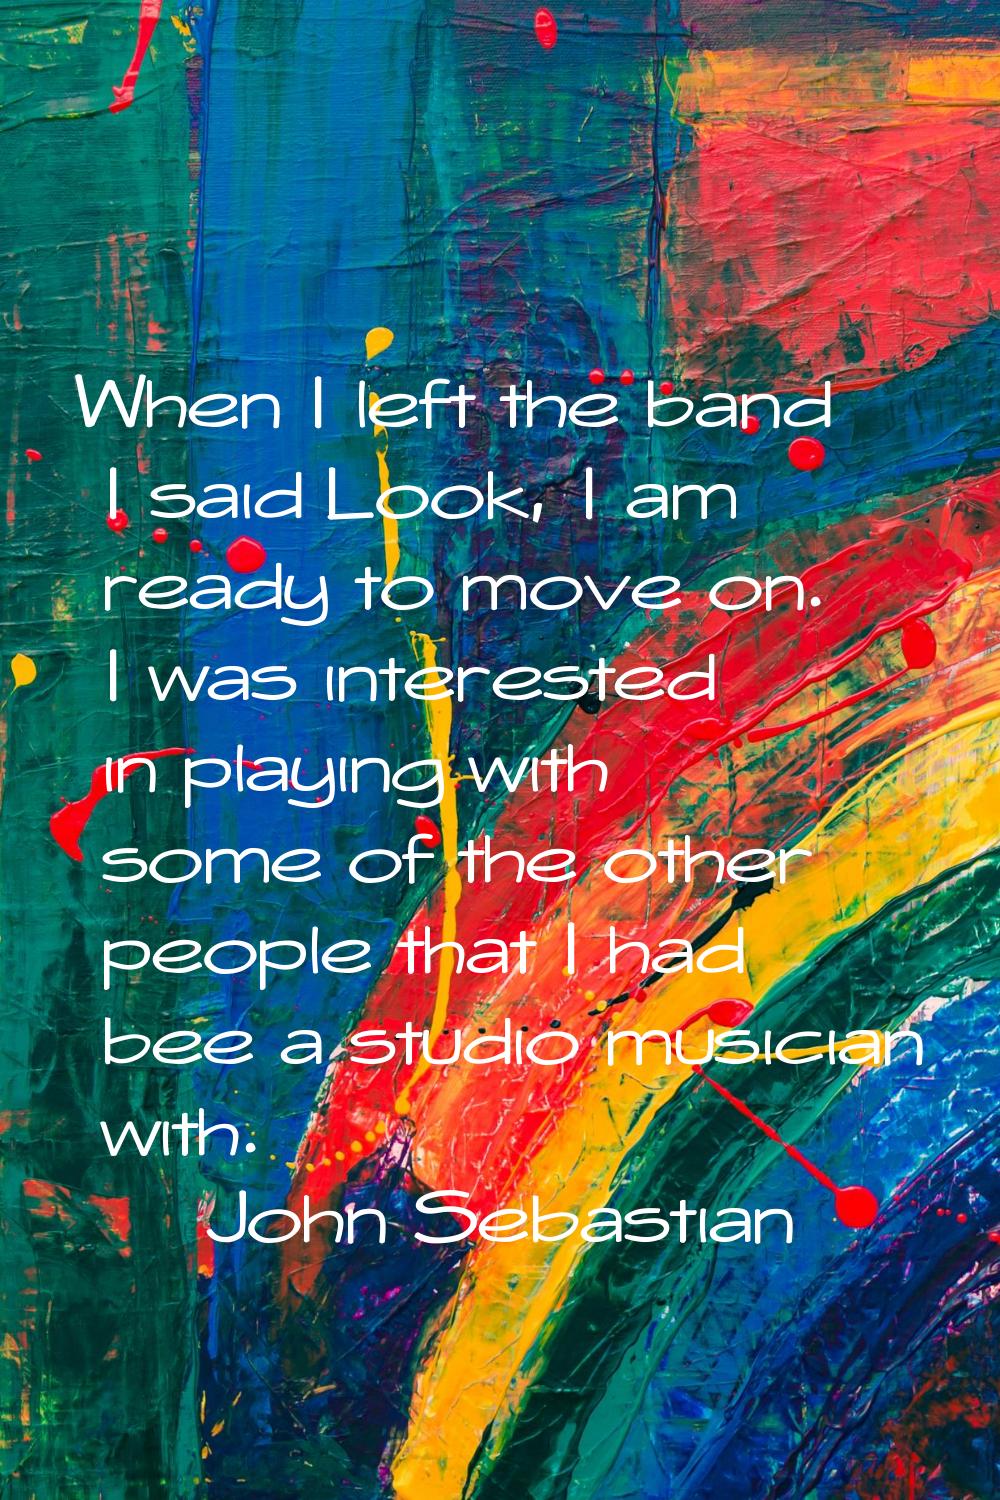 When I left the band I said Look, I am ready to move on. I was interested in playing with some of t